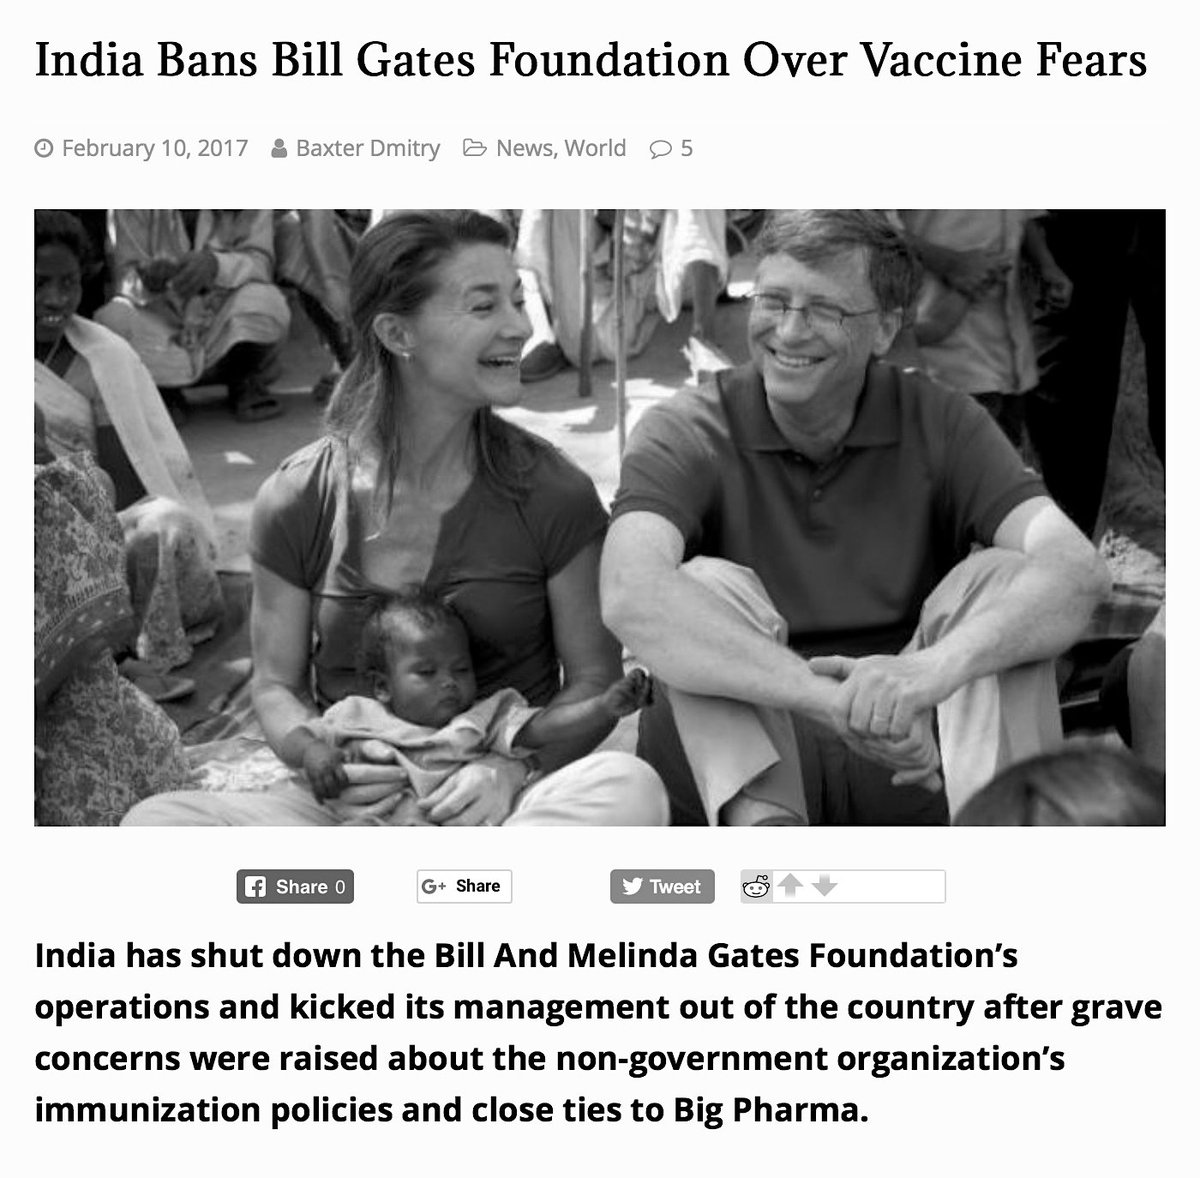 Gates Foundation Kicked Out Of India.'The Gates Foundation Has For Years Funded ITSU Which Provides Strategy And Monitoring Advice For New Delhi’s Massive Immunization Program That Covers About 27 Million Infants Each Year.'February 10, 2017. https://newspunch.com/india-bill-gates-vaccine/ #QAnon